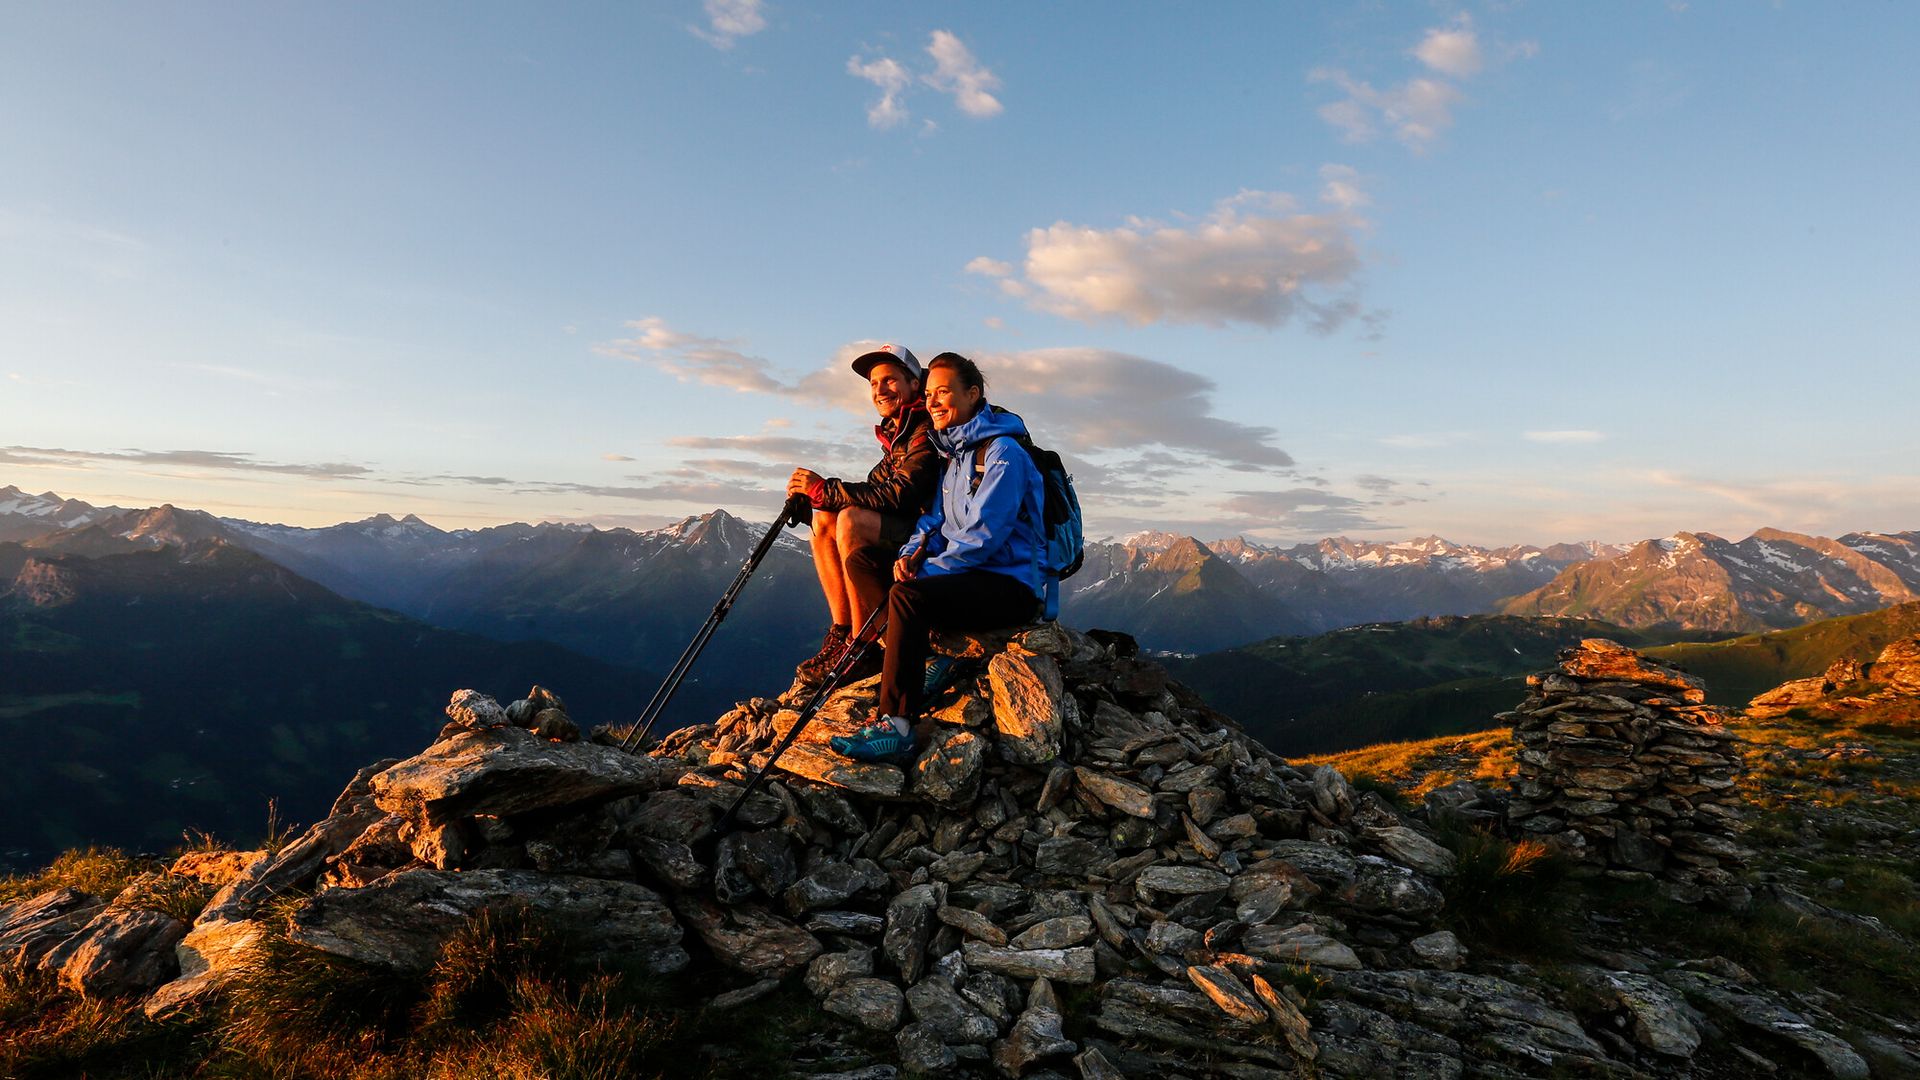 Hikers enjoy the sunrise in the Zillertal